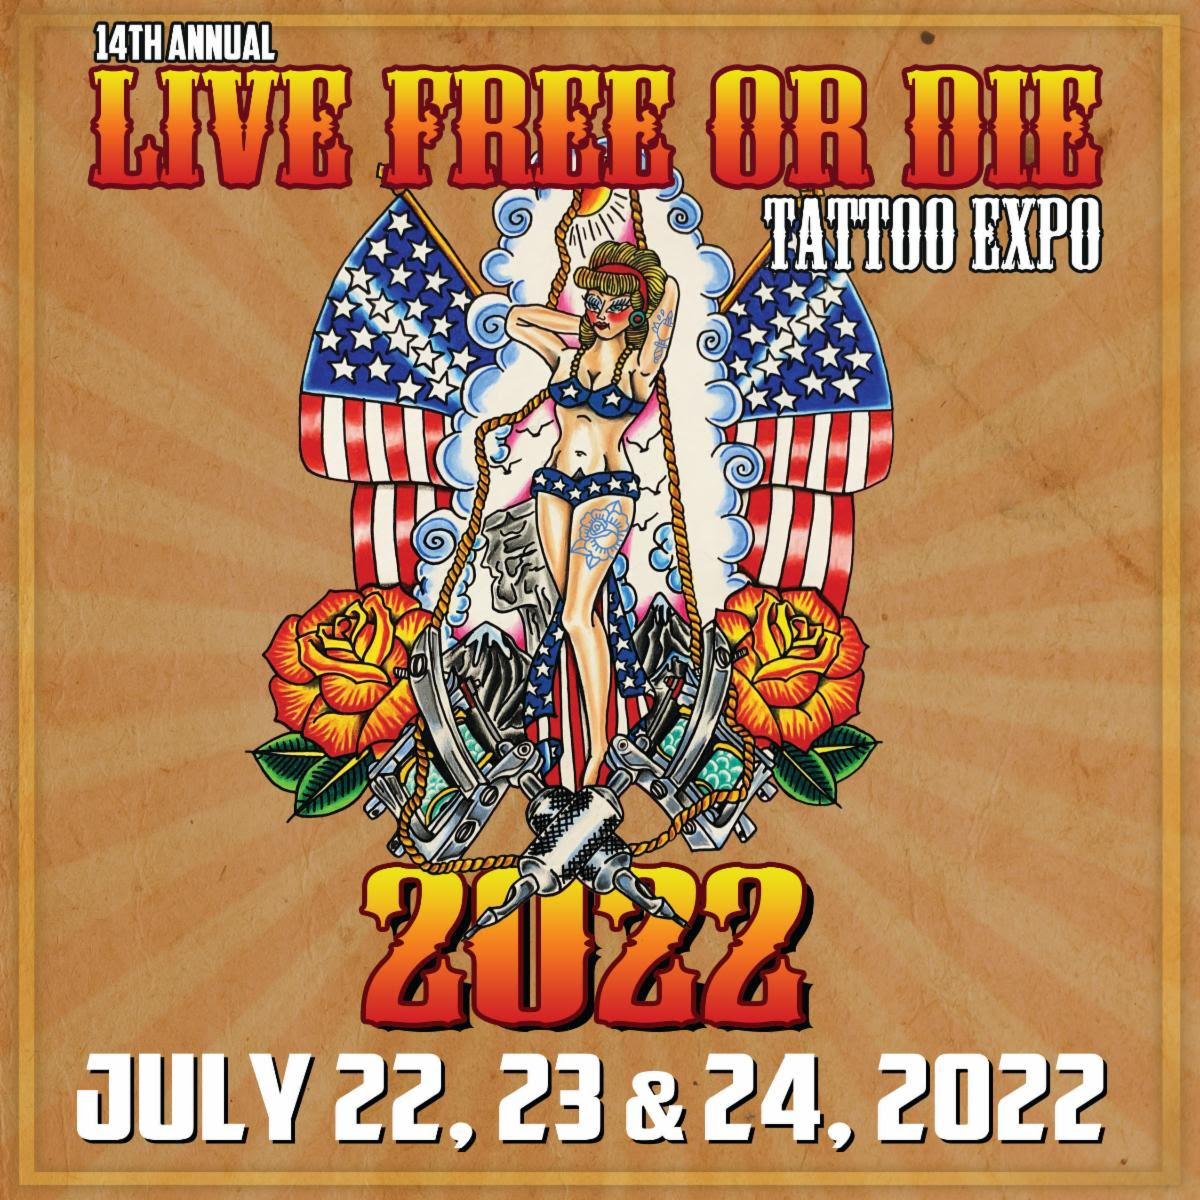 Live Free or Die Tattoo Expo - Manchester, NH - July 22-24, 2022